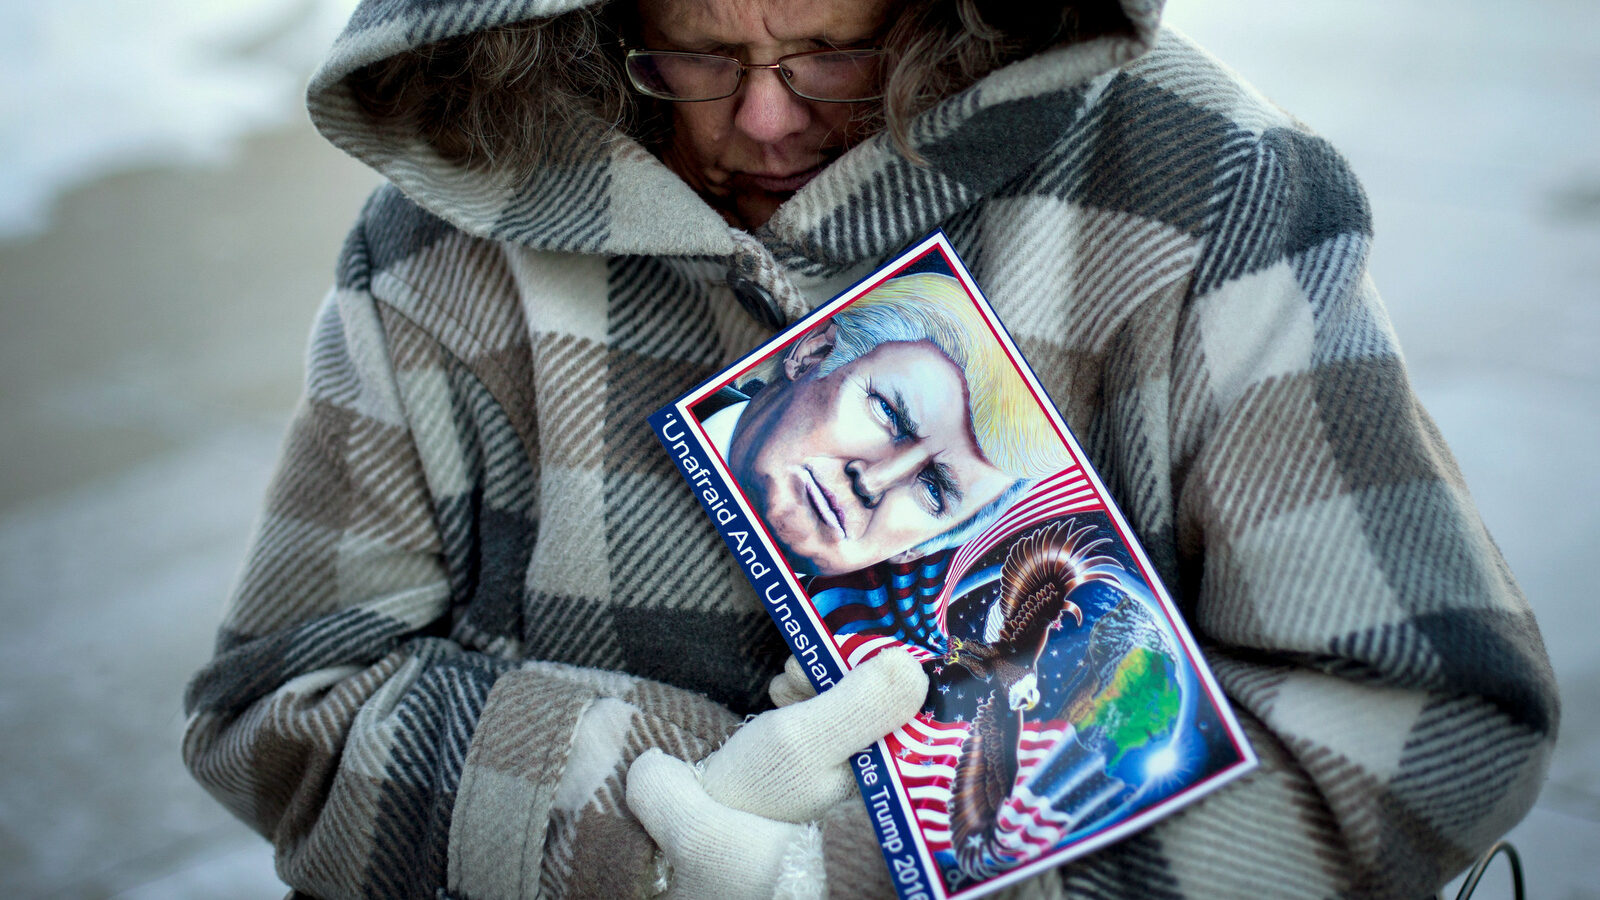 Donald Trump devotee Debbie Heinick shivers while waiting in line to attend a rally for the Republican presidential candidate, Tuesday, Jan. 12, 2016, in Cedar Falls, Iowa. (AP Photo/Jae C. Hong)